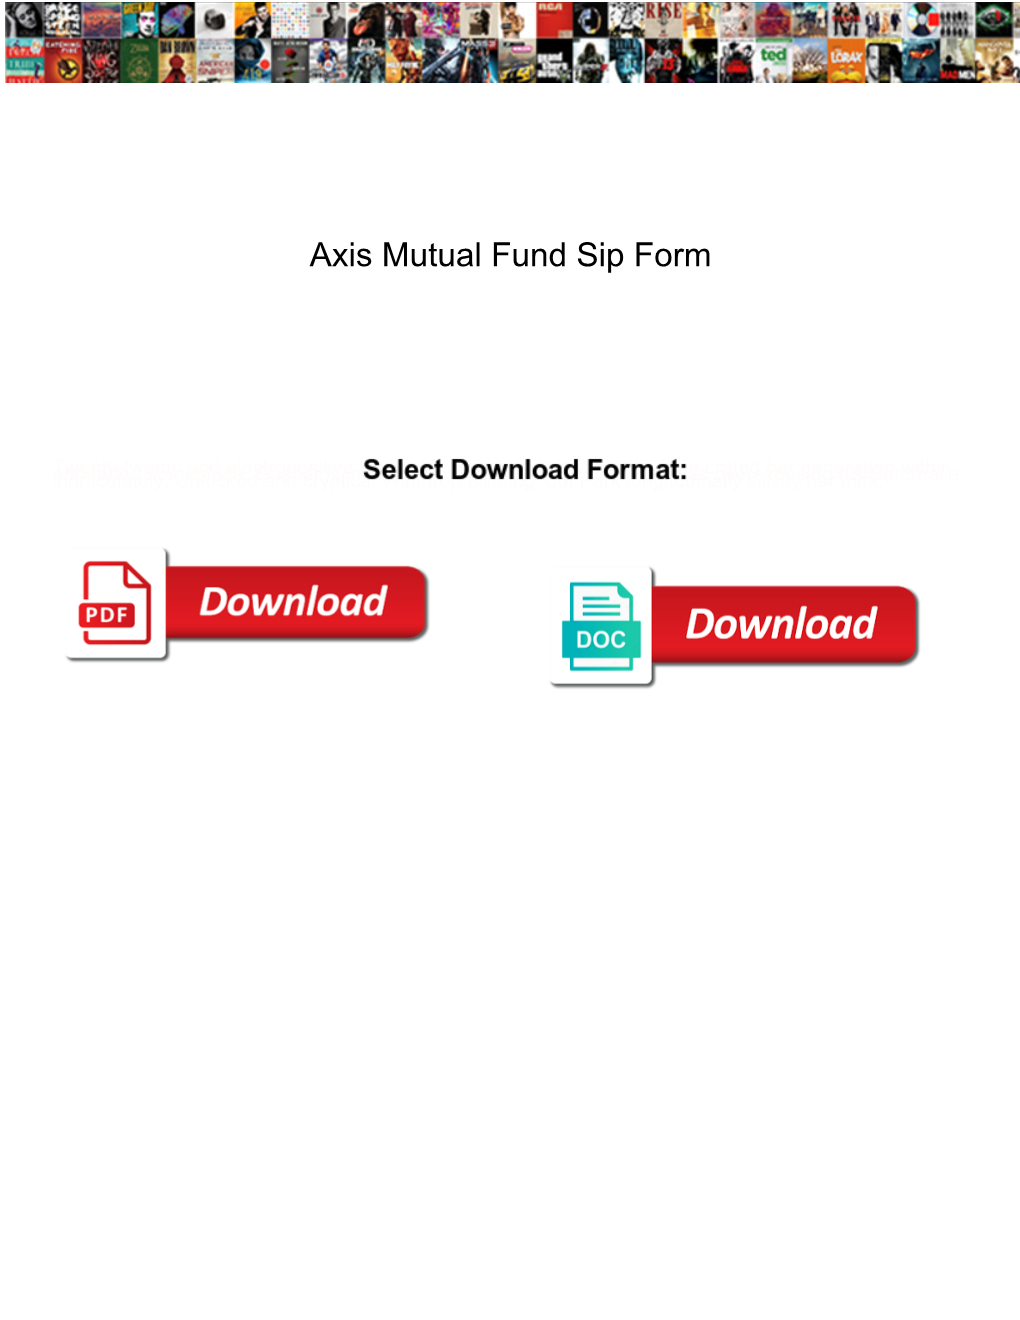 Axis Mutual Fund Sip Form